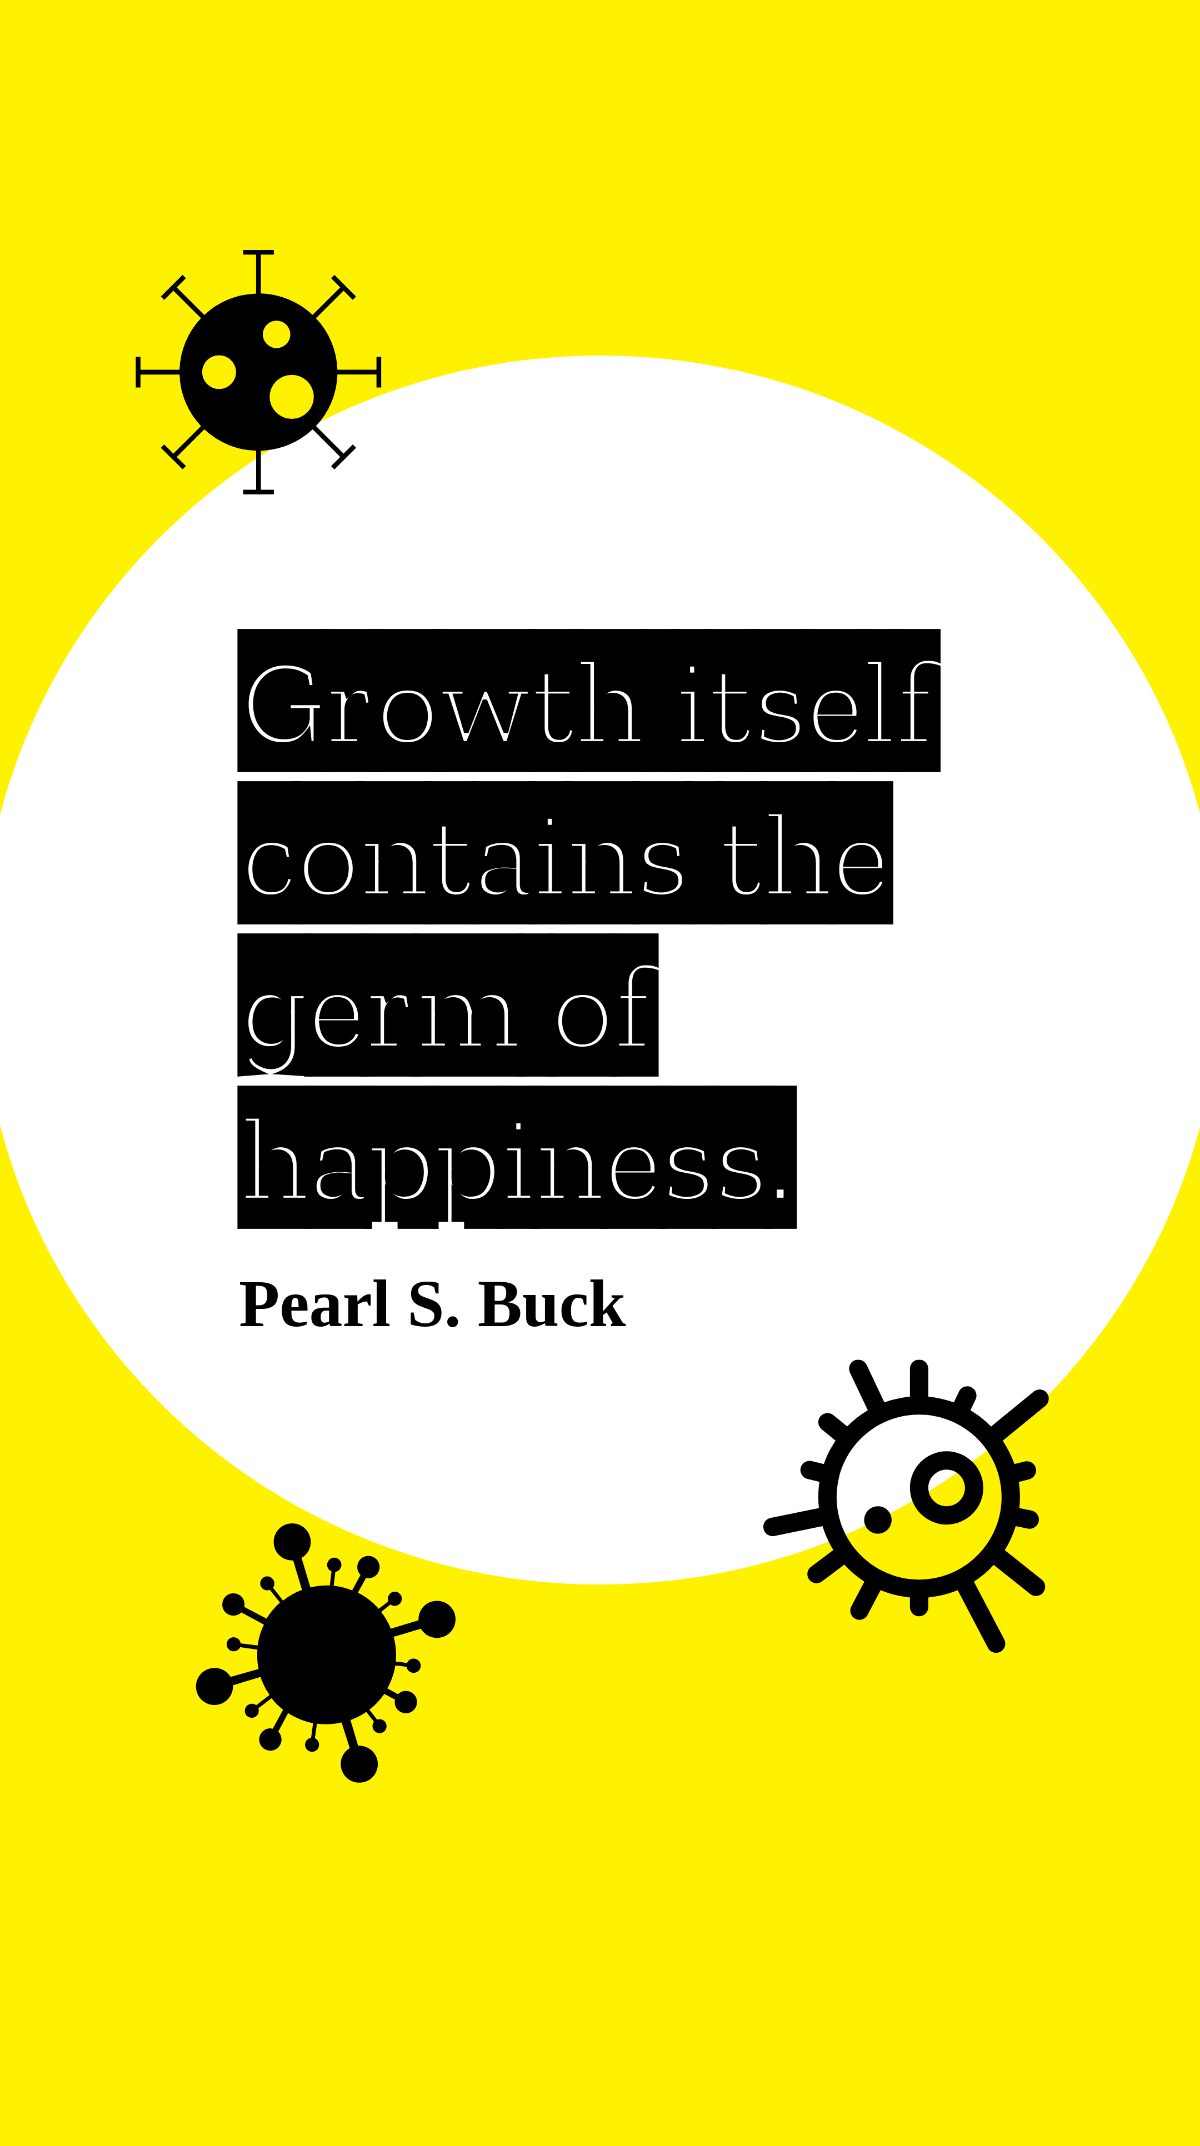 Pearl S. Buck - Growth itself contains the germ of happiness. Template